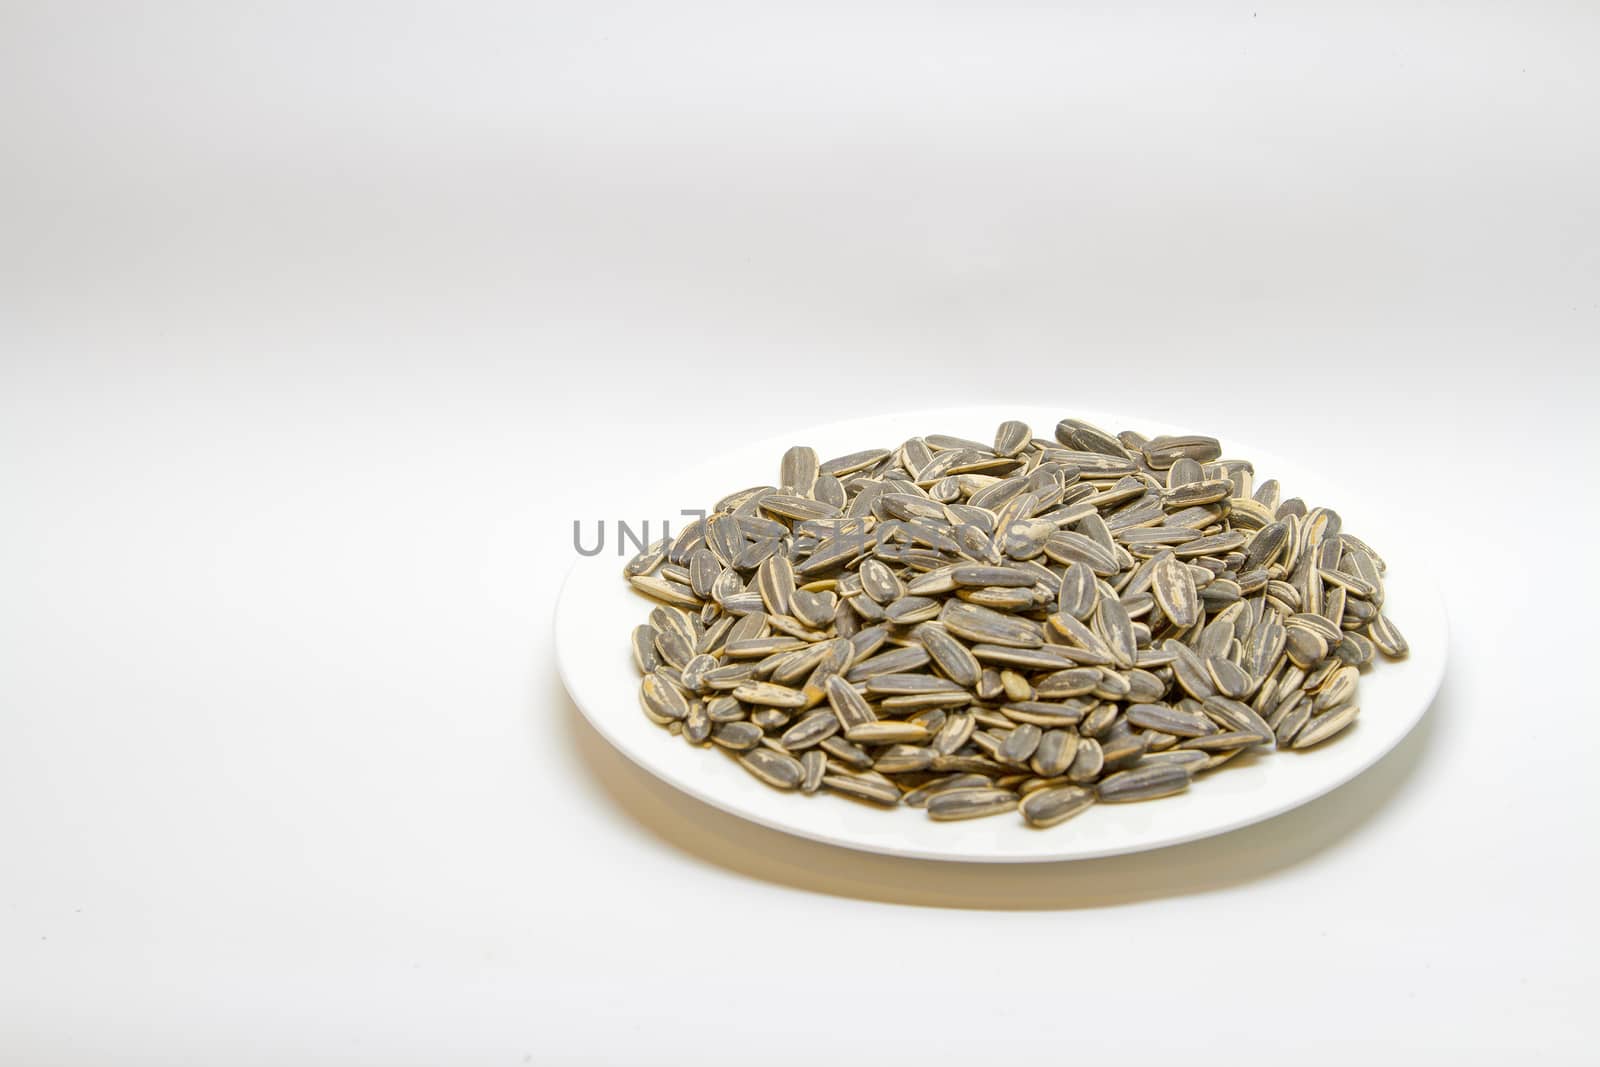 Dried sunflower seeds in the white plate on white background.